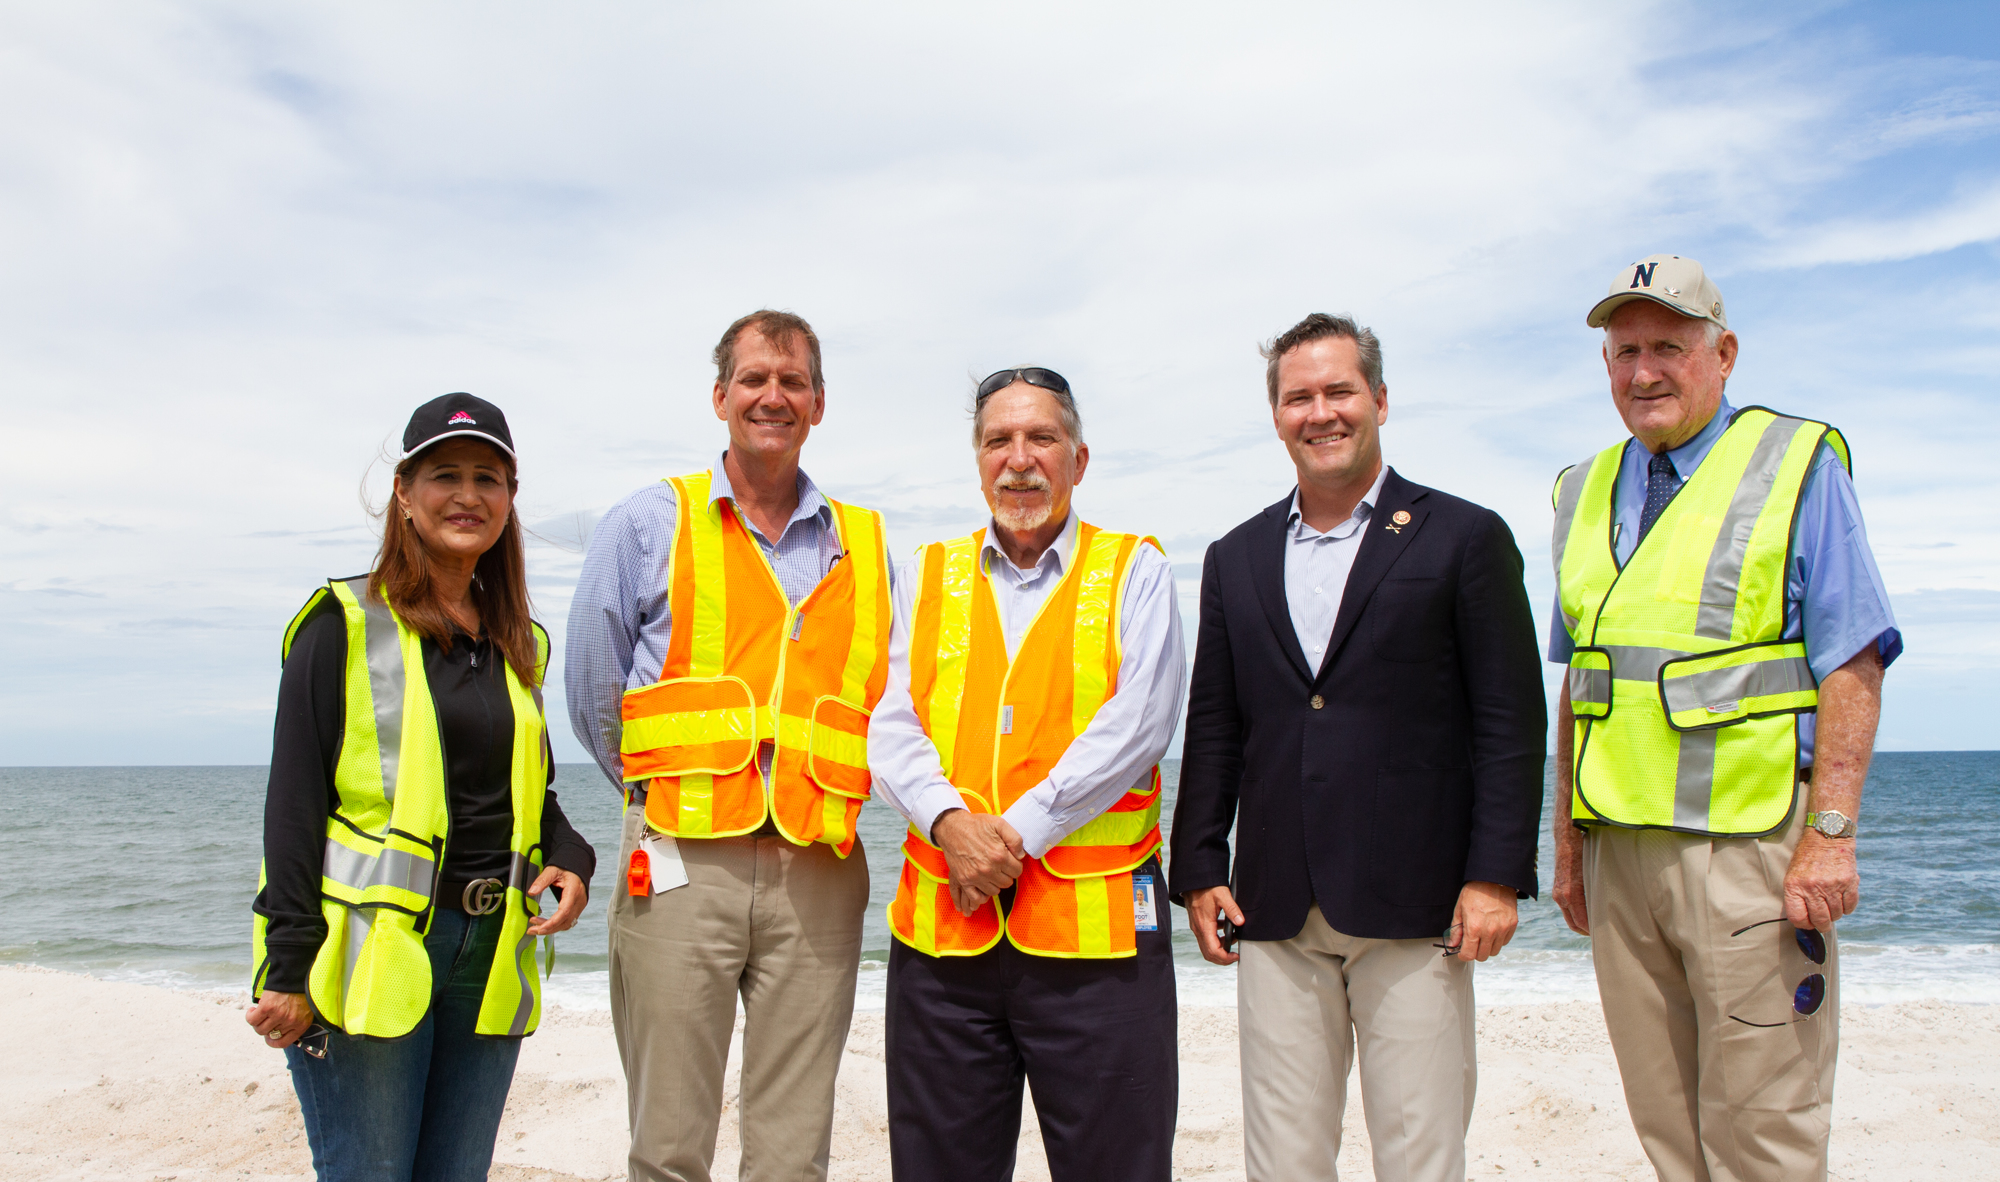 County Engineer Faith Alkhatib, Deland Operations Engineer Ron Meade, Director of transportation Operations Alan Hyman, Congressman Waltz, and county commissioner Dave Sullivan on north Flagler Beach.  Photo by Paola Rodriguez